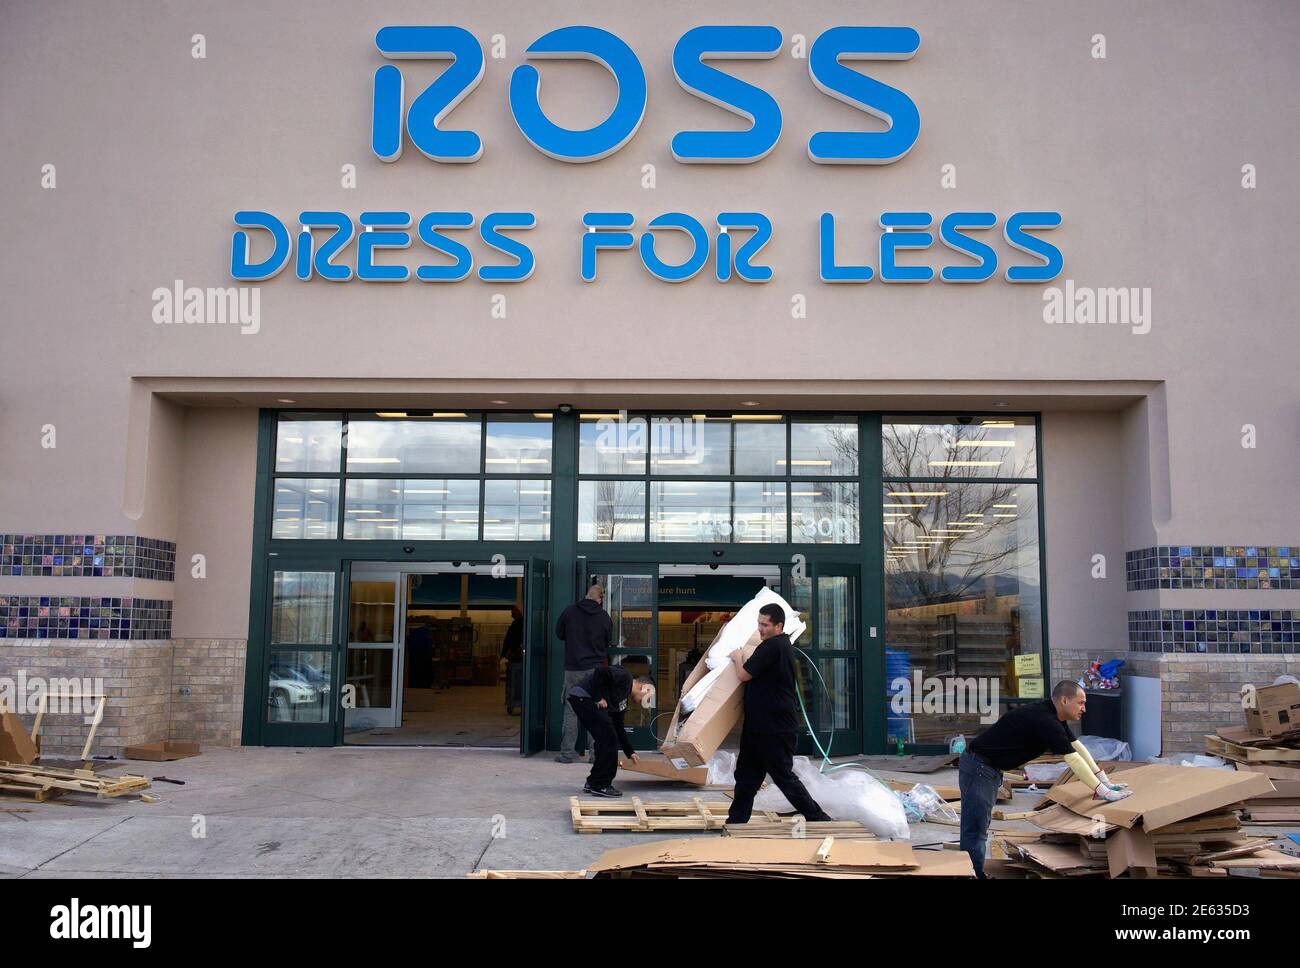 veredicto travesura perecer Workers prepare a new Ross store which is opening soon in Broomfield,  Colorado February 27, 2014. Ross Stores, Inc. will announce their quarterly  results on Thursday. REUTERS/Rick Wilking (UNITED STATES - Tags: